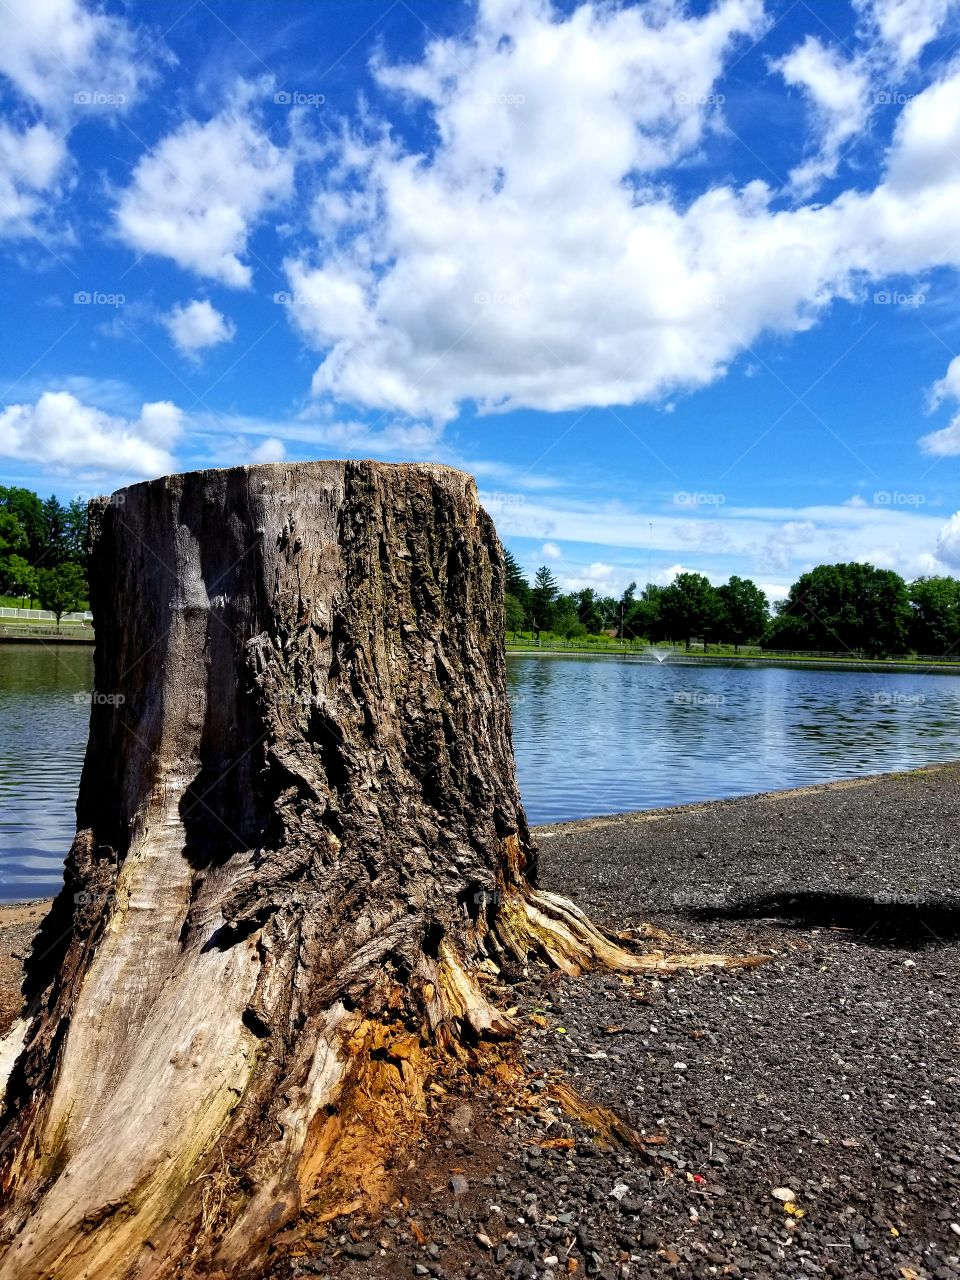 Found an interesting tree stump while srolling by the lake.